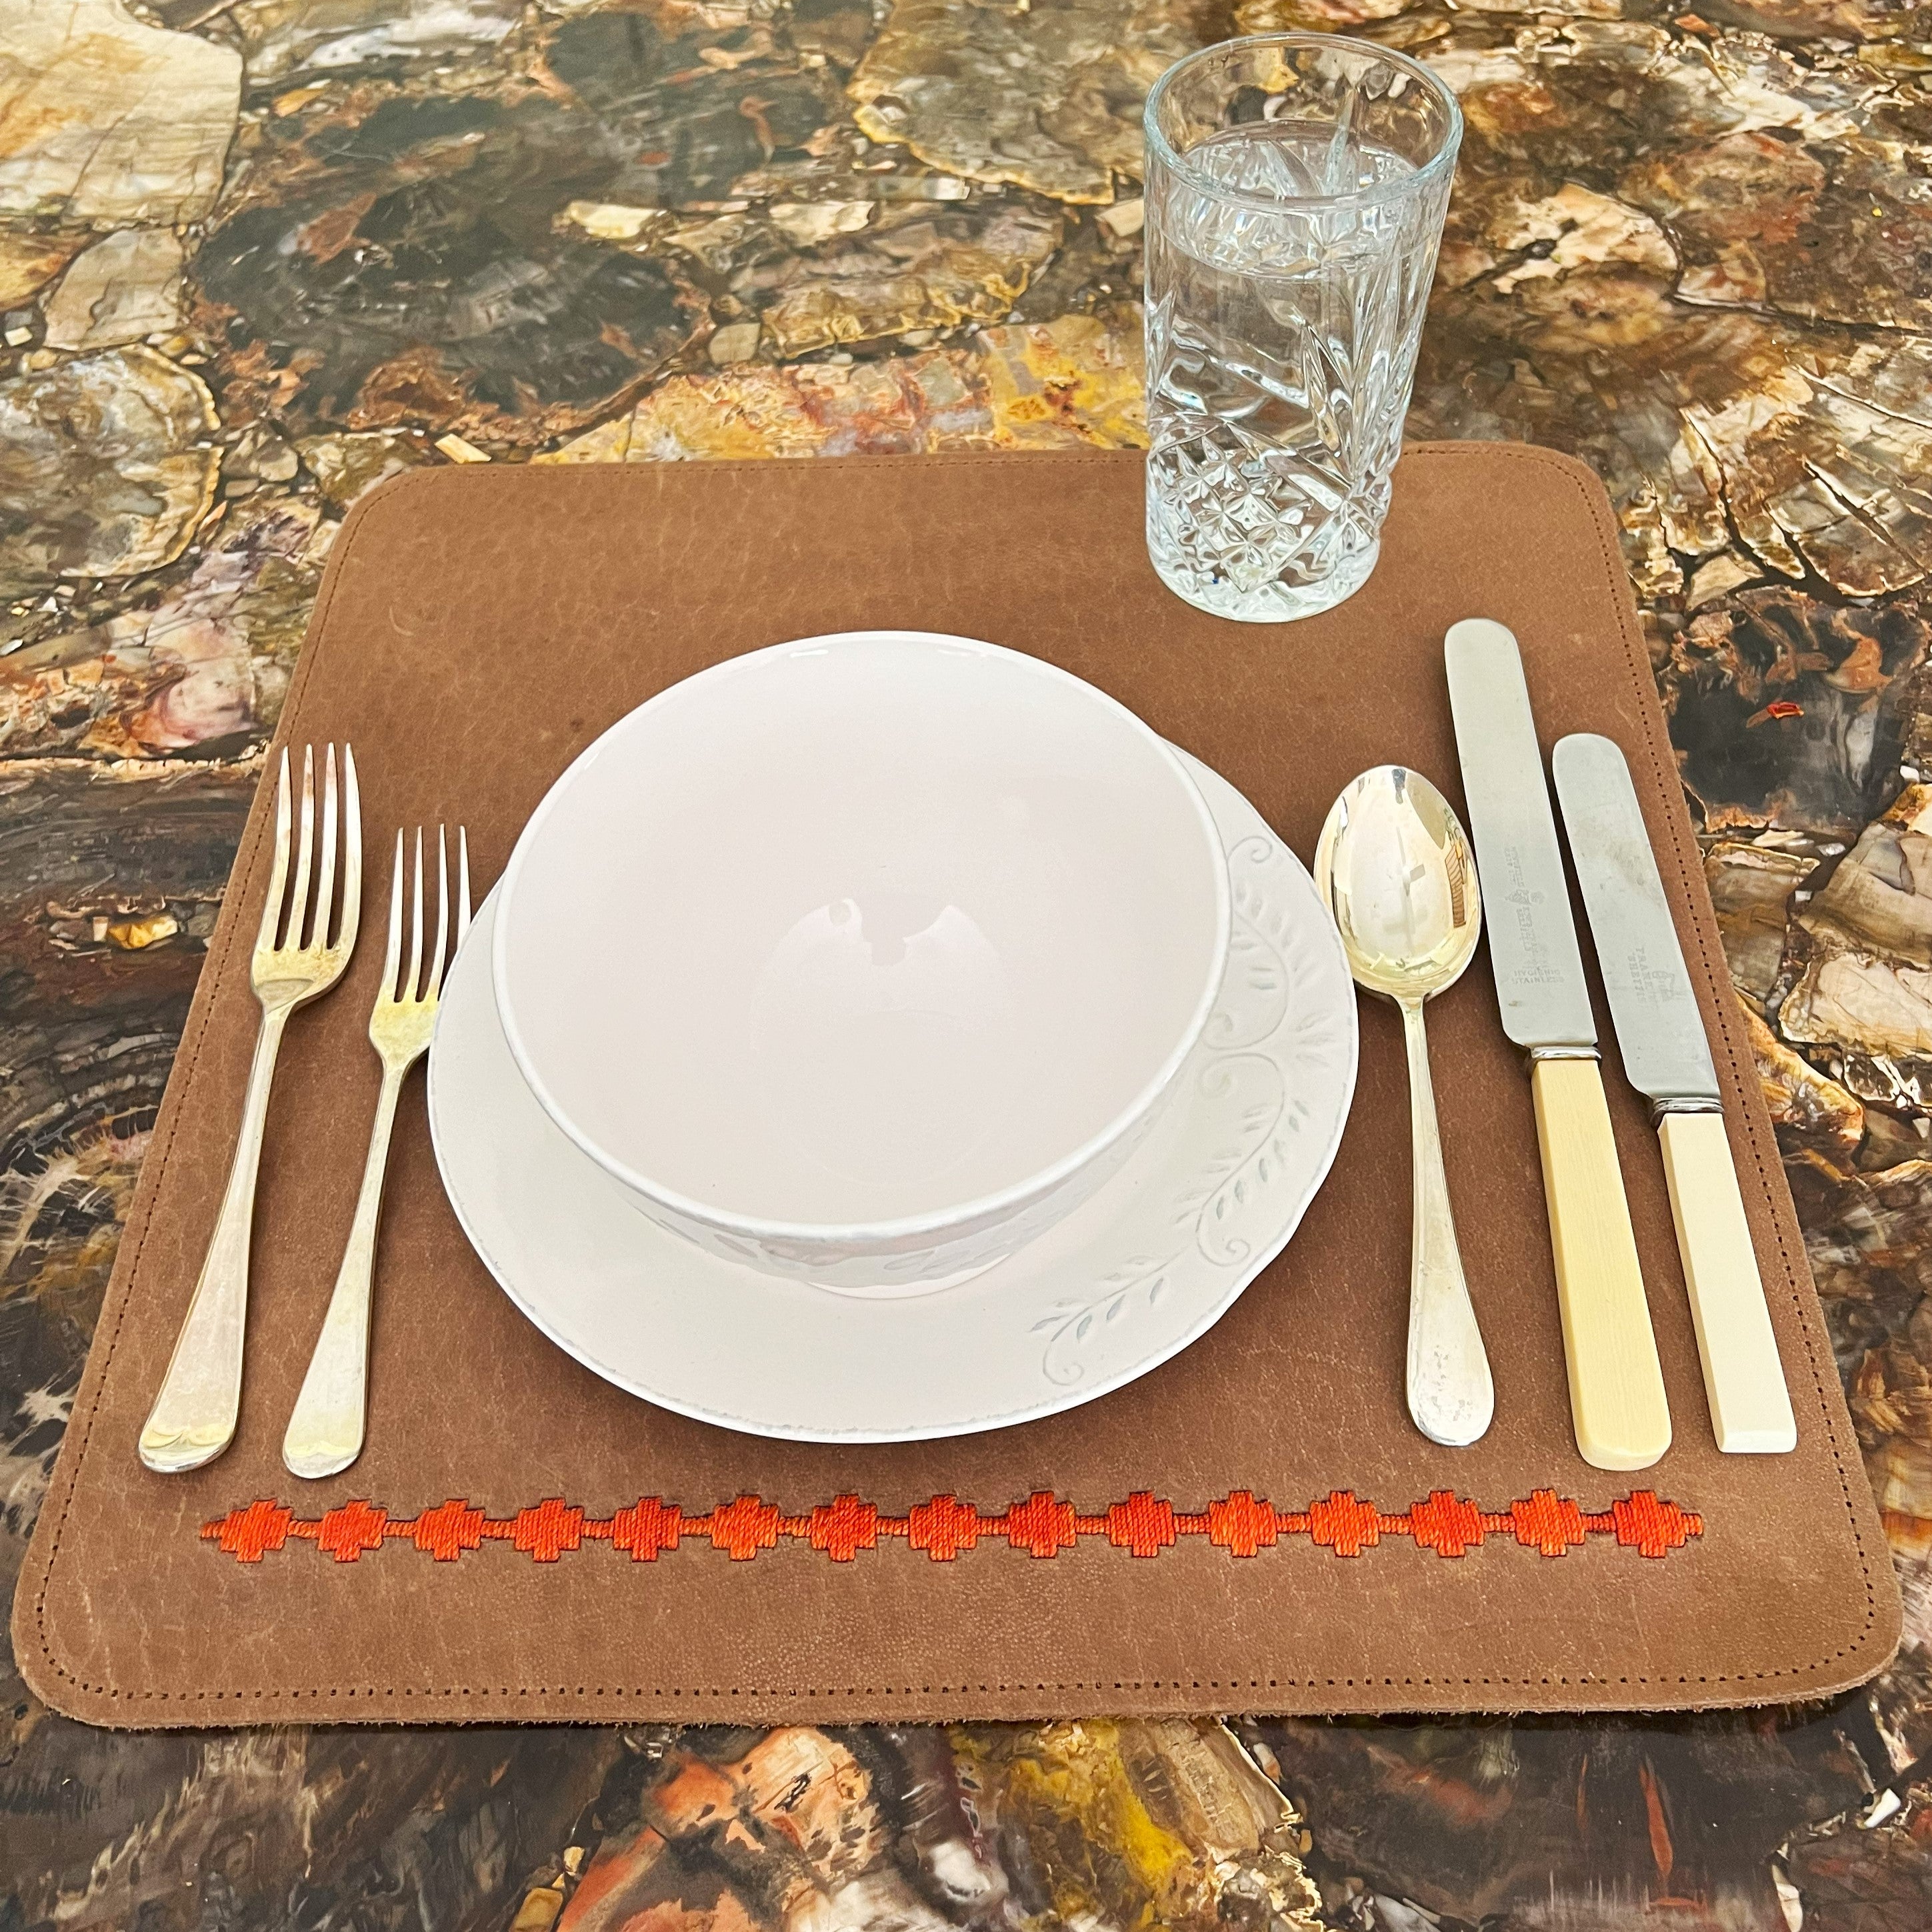 A table setting featuring a white plate with an intricate design on a LIMITED EDITION Georgie Paws buffalo leather dinner mat in ochre, adorned with a red floral pattern. Accompanied by two forks, a spoon, two knives.